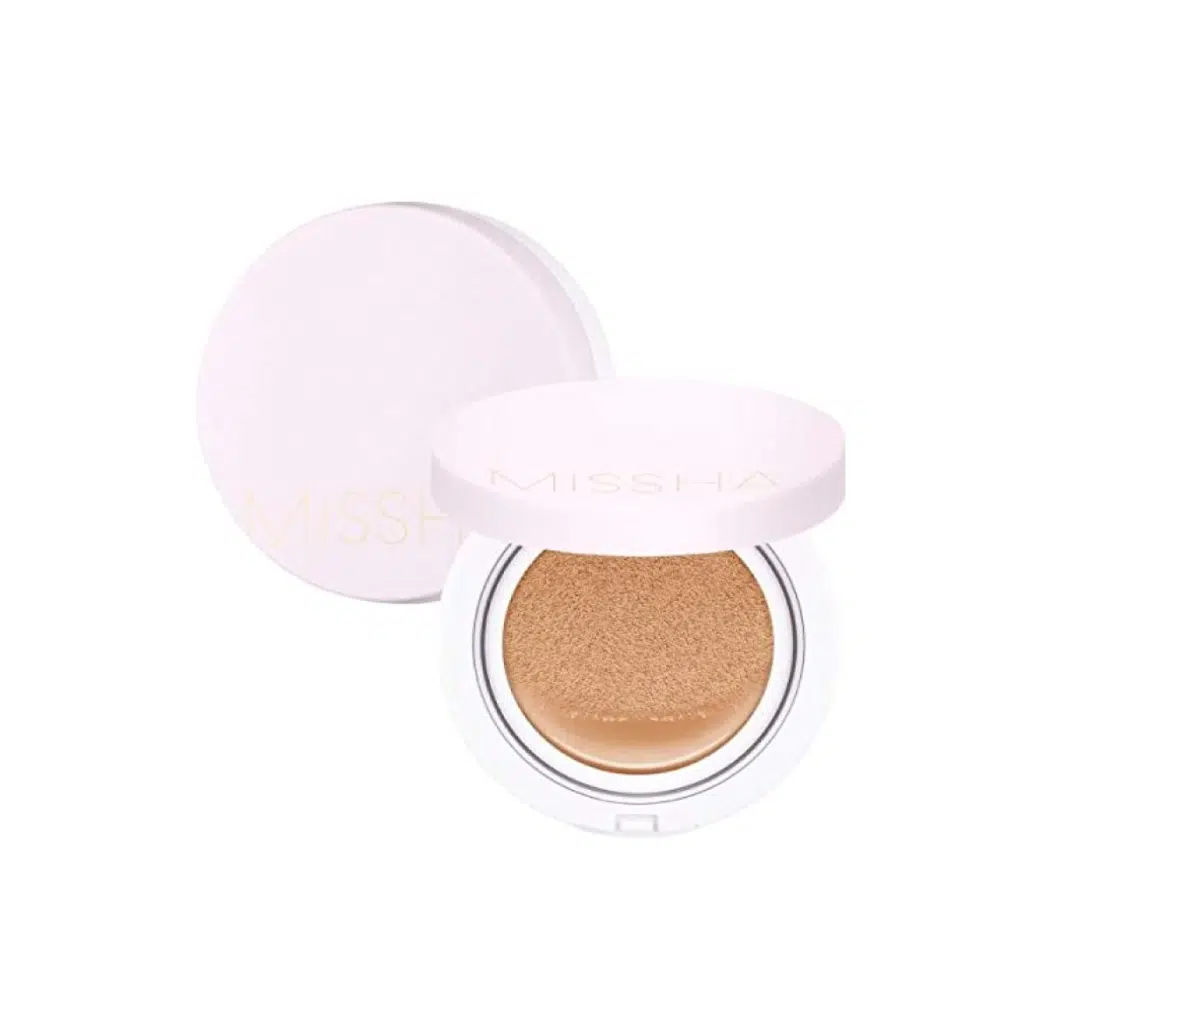 Best Korean cushion foundation, by beauty blogger What The Fab 